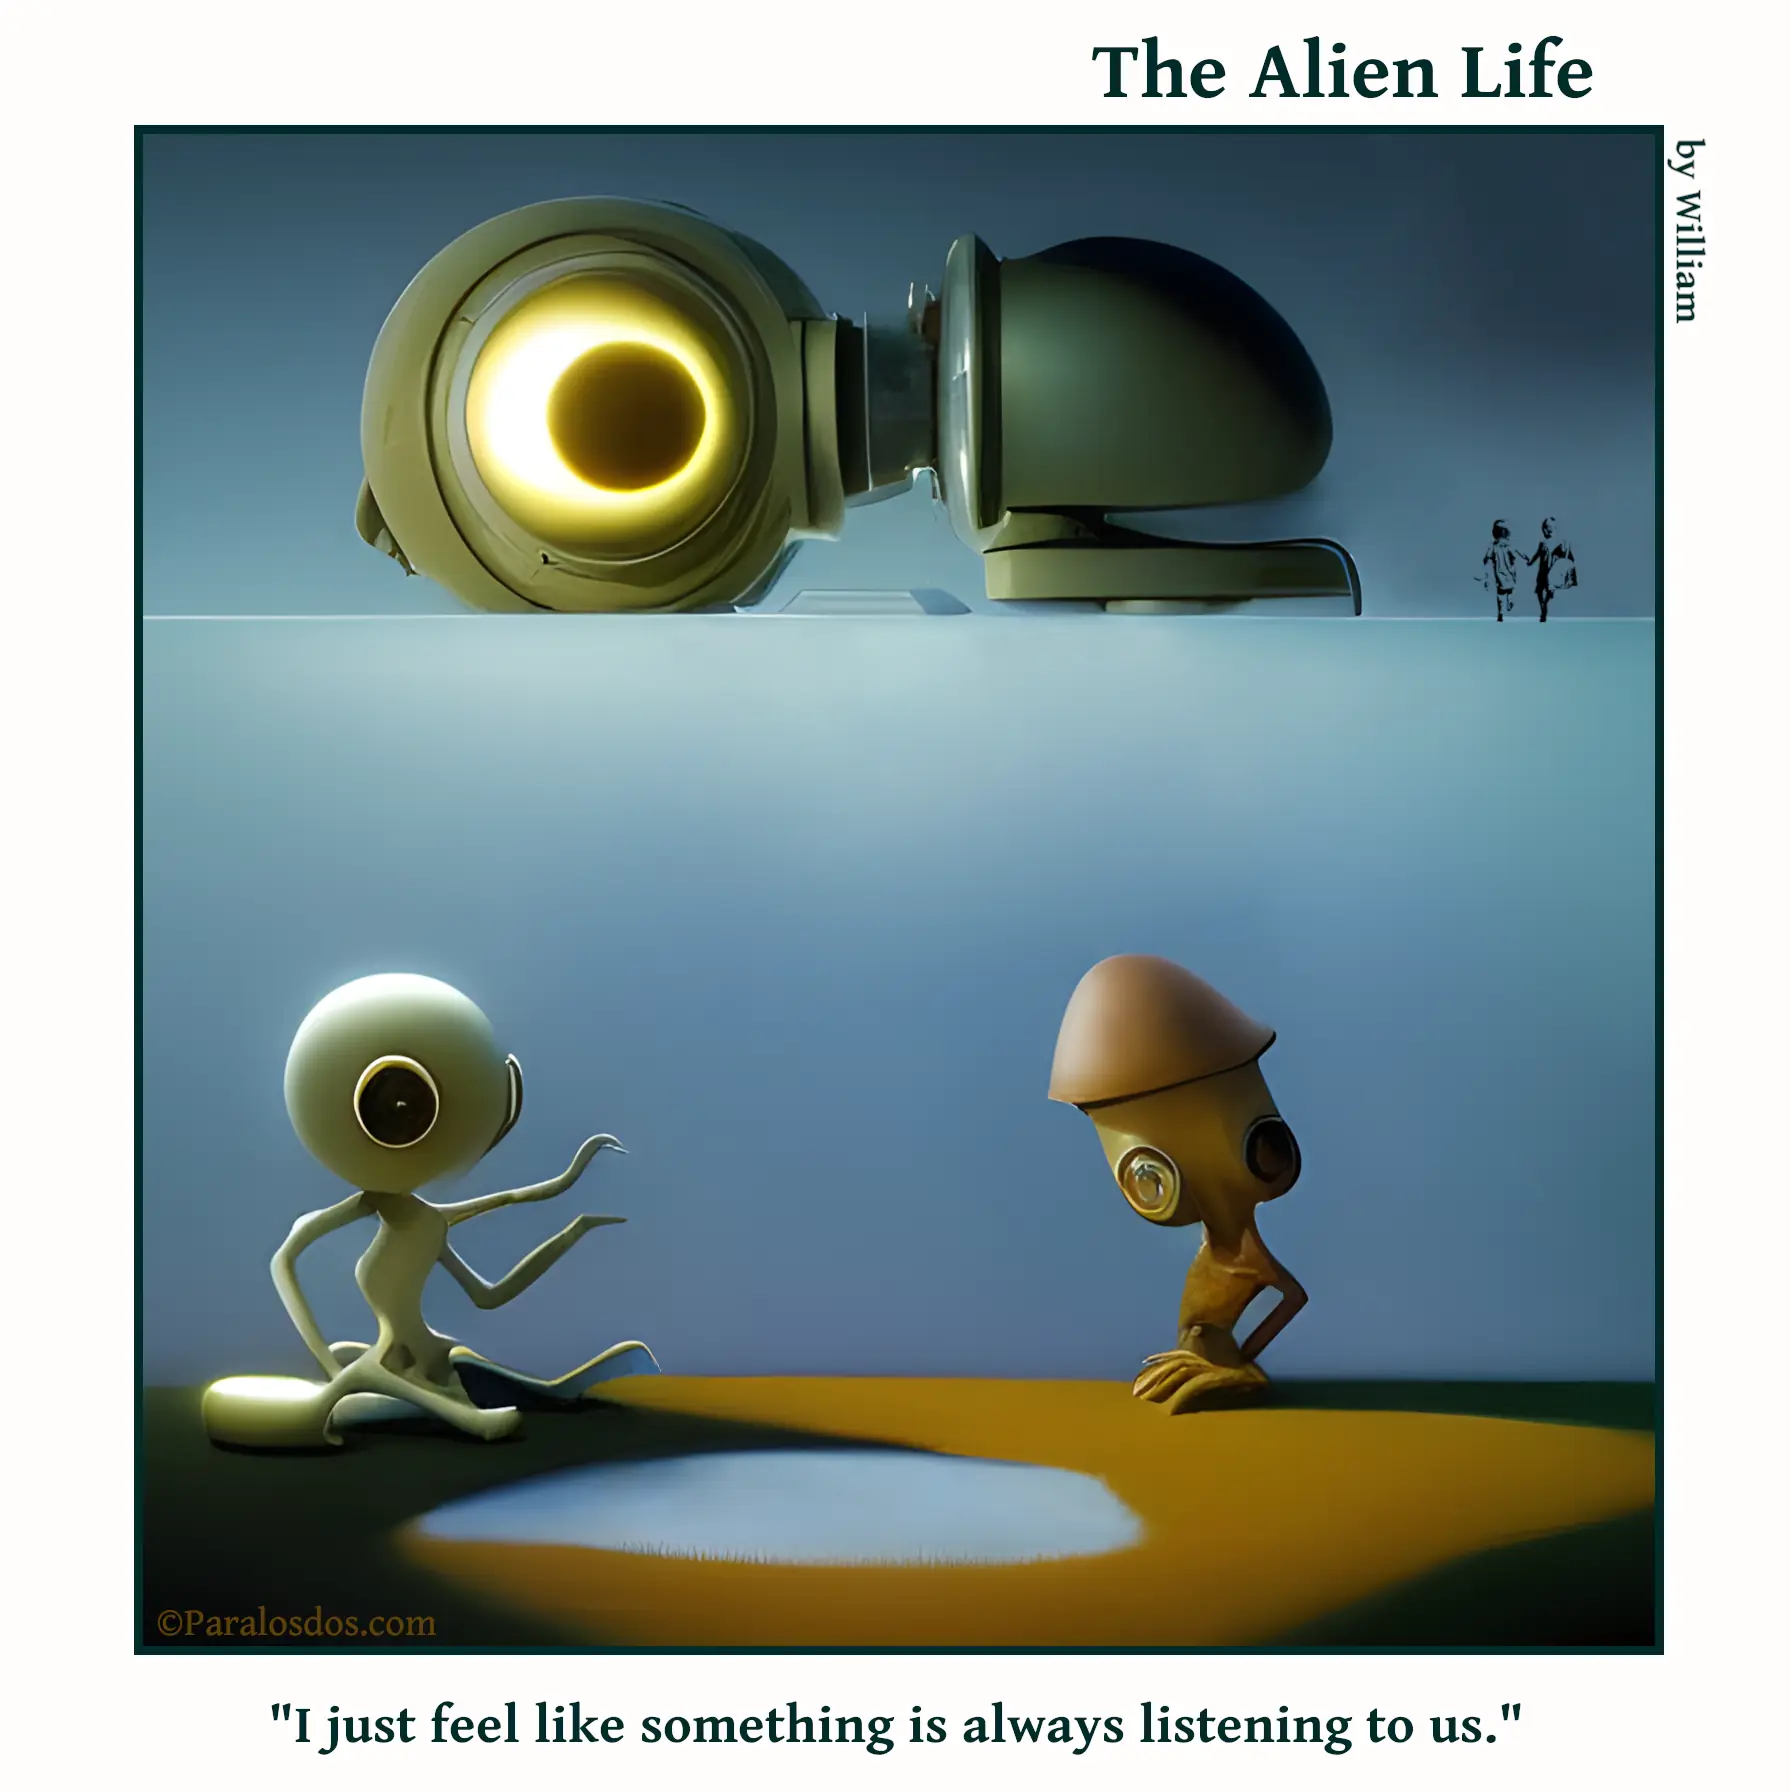 The Alien Life, one panel Comic. Two aliens are sitting at a table. A robot with one big eye and it's ear pressed to the ground is in the ceiling above them. The caption reads: "I just feel like something is always listening to us."